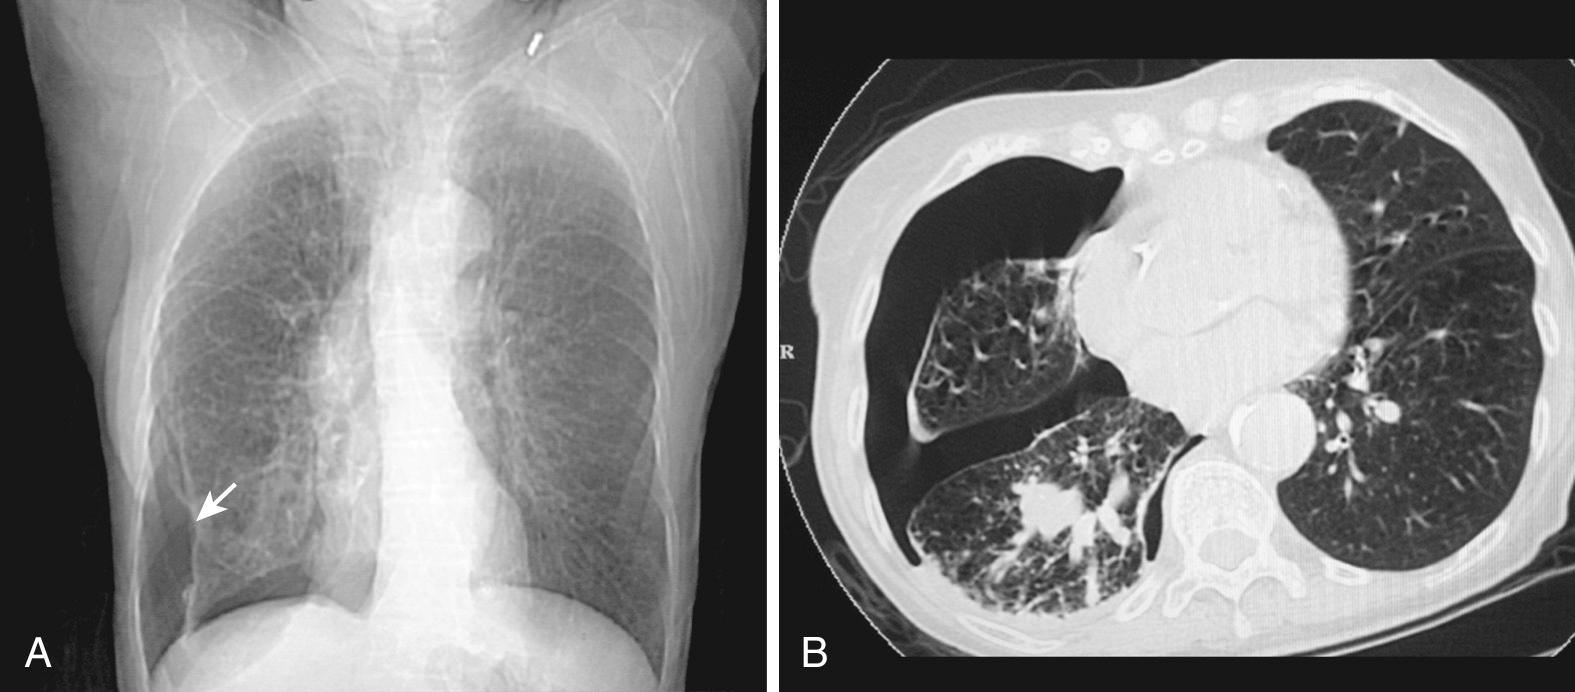 Figure 10.1, Pneumothorax. A, Anteroposterior chest radiograph of a right-sided, seemingly small, simple pneumothorax (PTX). Note the absence of peripheral lung markings on the right side and the distinct line indicating the edge of the collapsed lung (arrow). Although this appears to be a small PTX, it produced significant dyspnea in this patient with chronic obstructive pulmonary disease and therefore required a chest tube. B, Computed tomography scan showing the extent of the collapse. Adhesions kept part of the lung expanded.